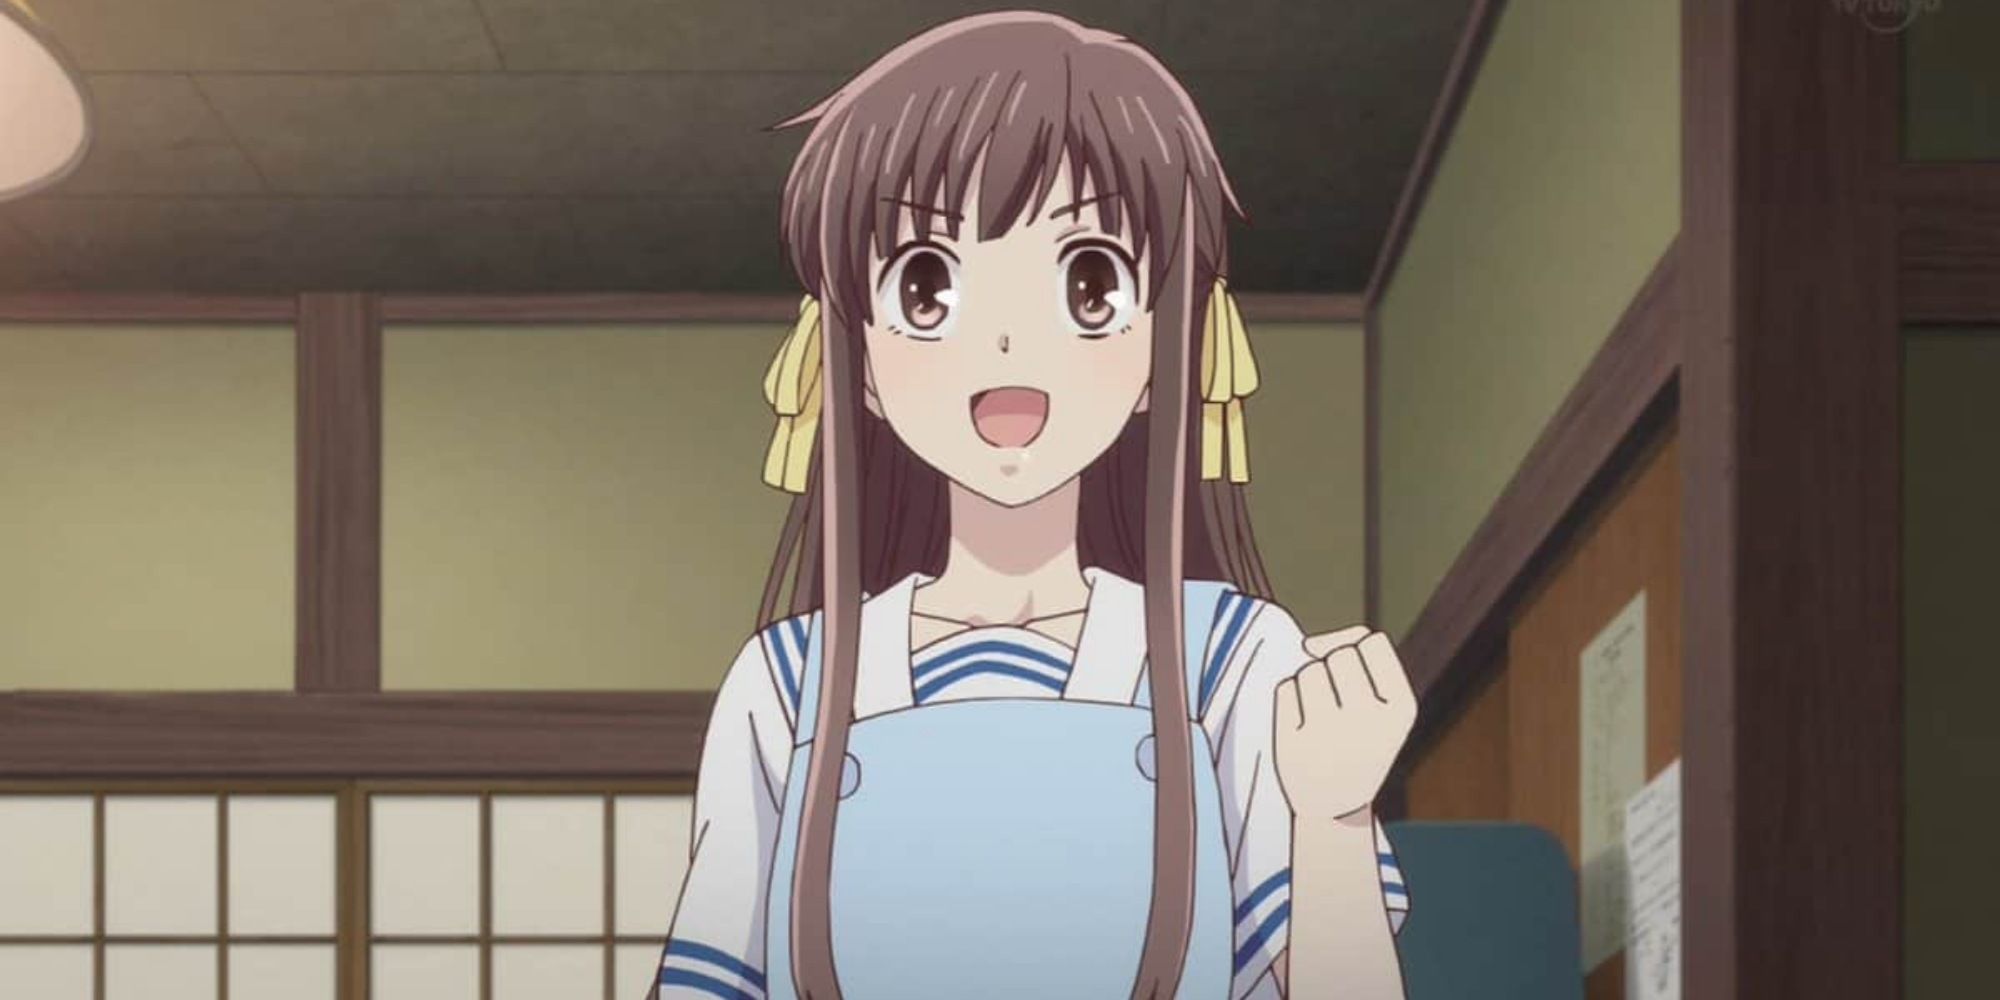 Tohru Honda wearing an apron and looking determined